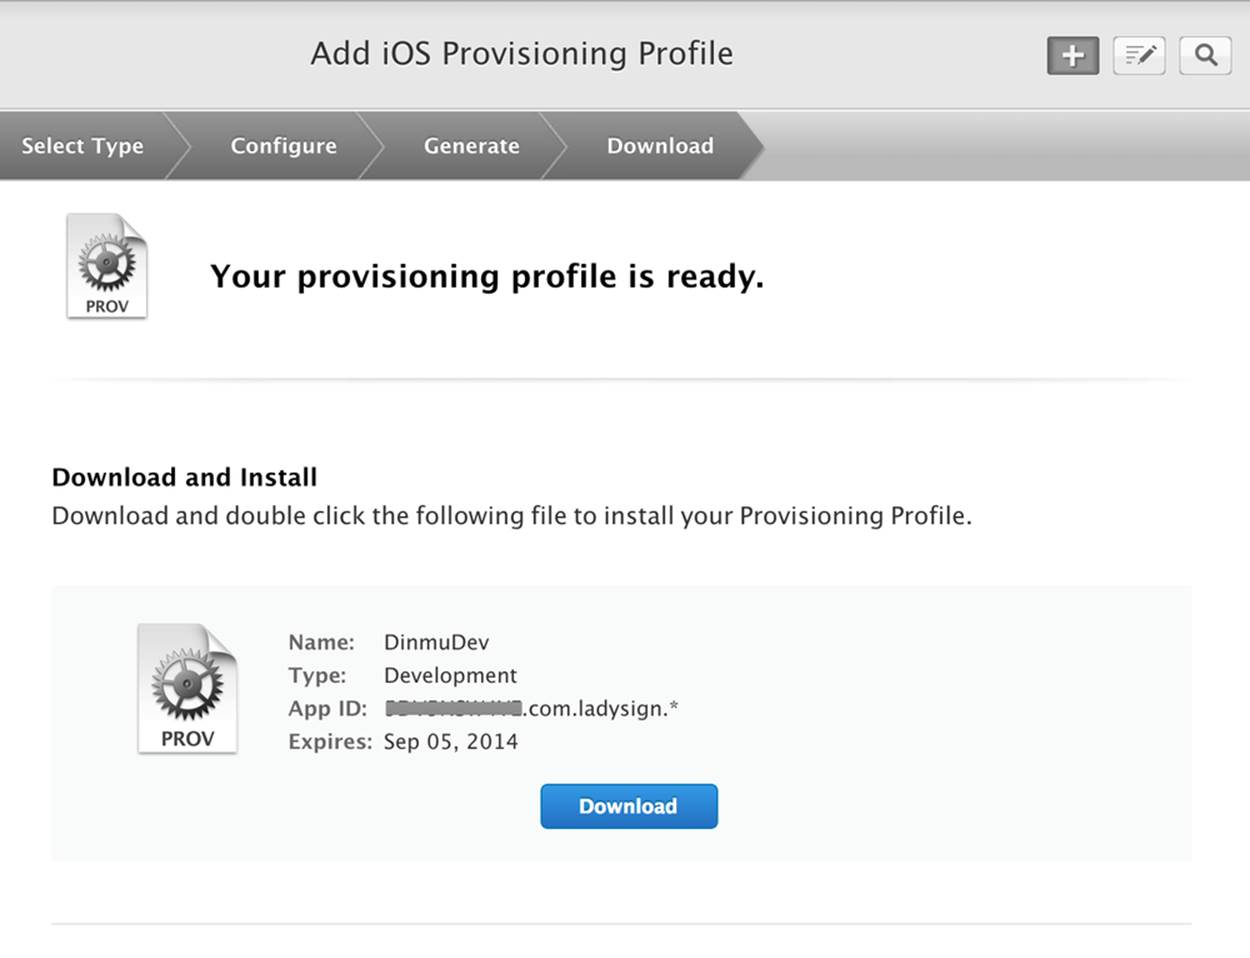 Download the provisioning profile to your hard disk